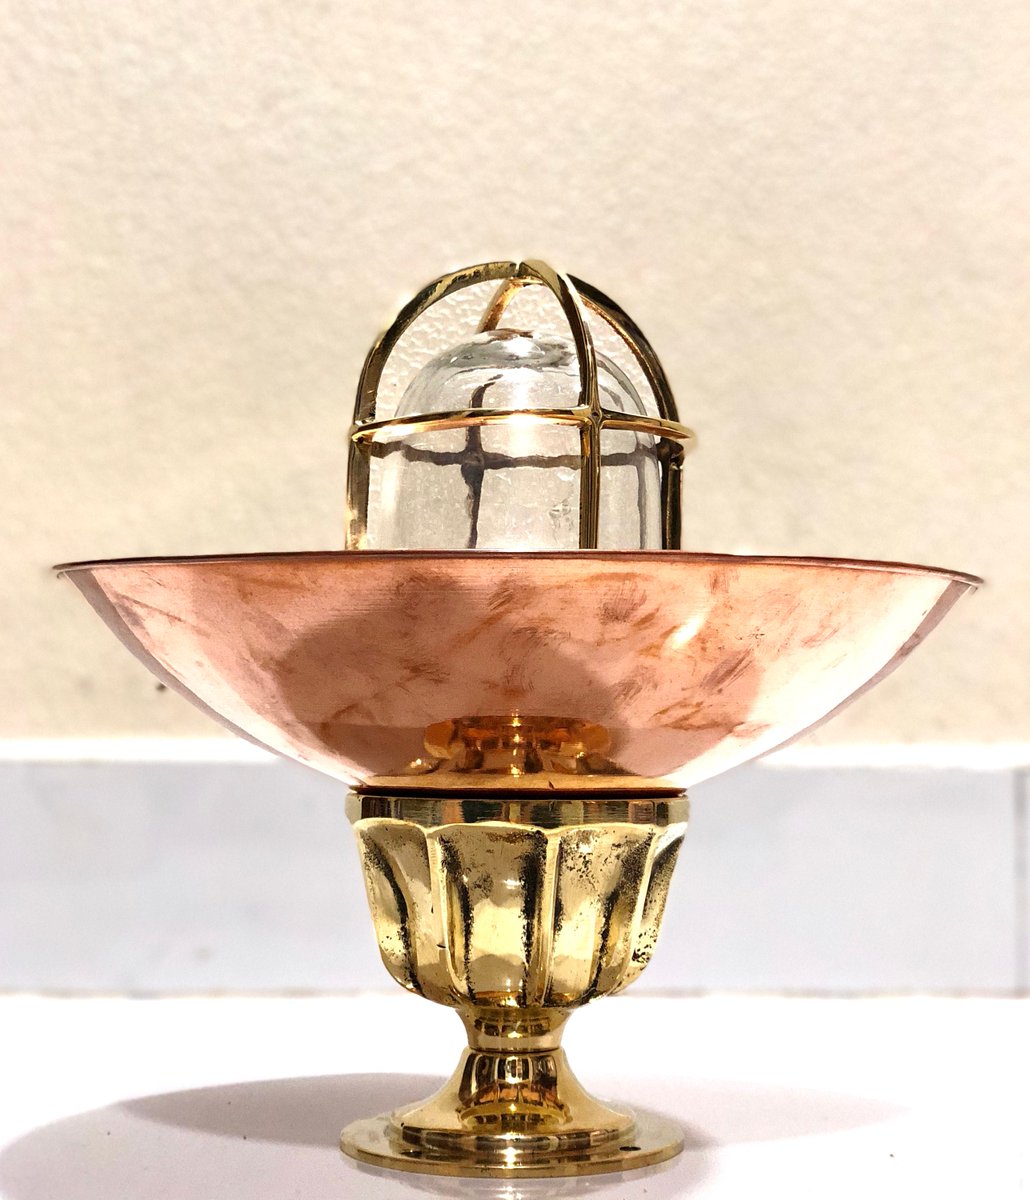 Excited to share the latest addition to my #etsyshop: Nautical Ship New Marine Passageway Bulkhead Ceiling Light with Copper Shade etsy.me/3QNJAcg #heritageantiquesusa #fixture #lampfixture #art #metal #nauticallight #ceilinglight #bulkheadlight #bulkheadlamp